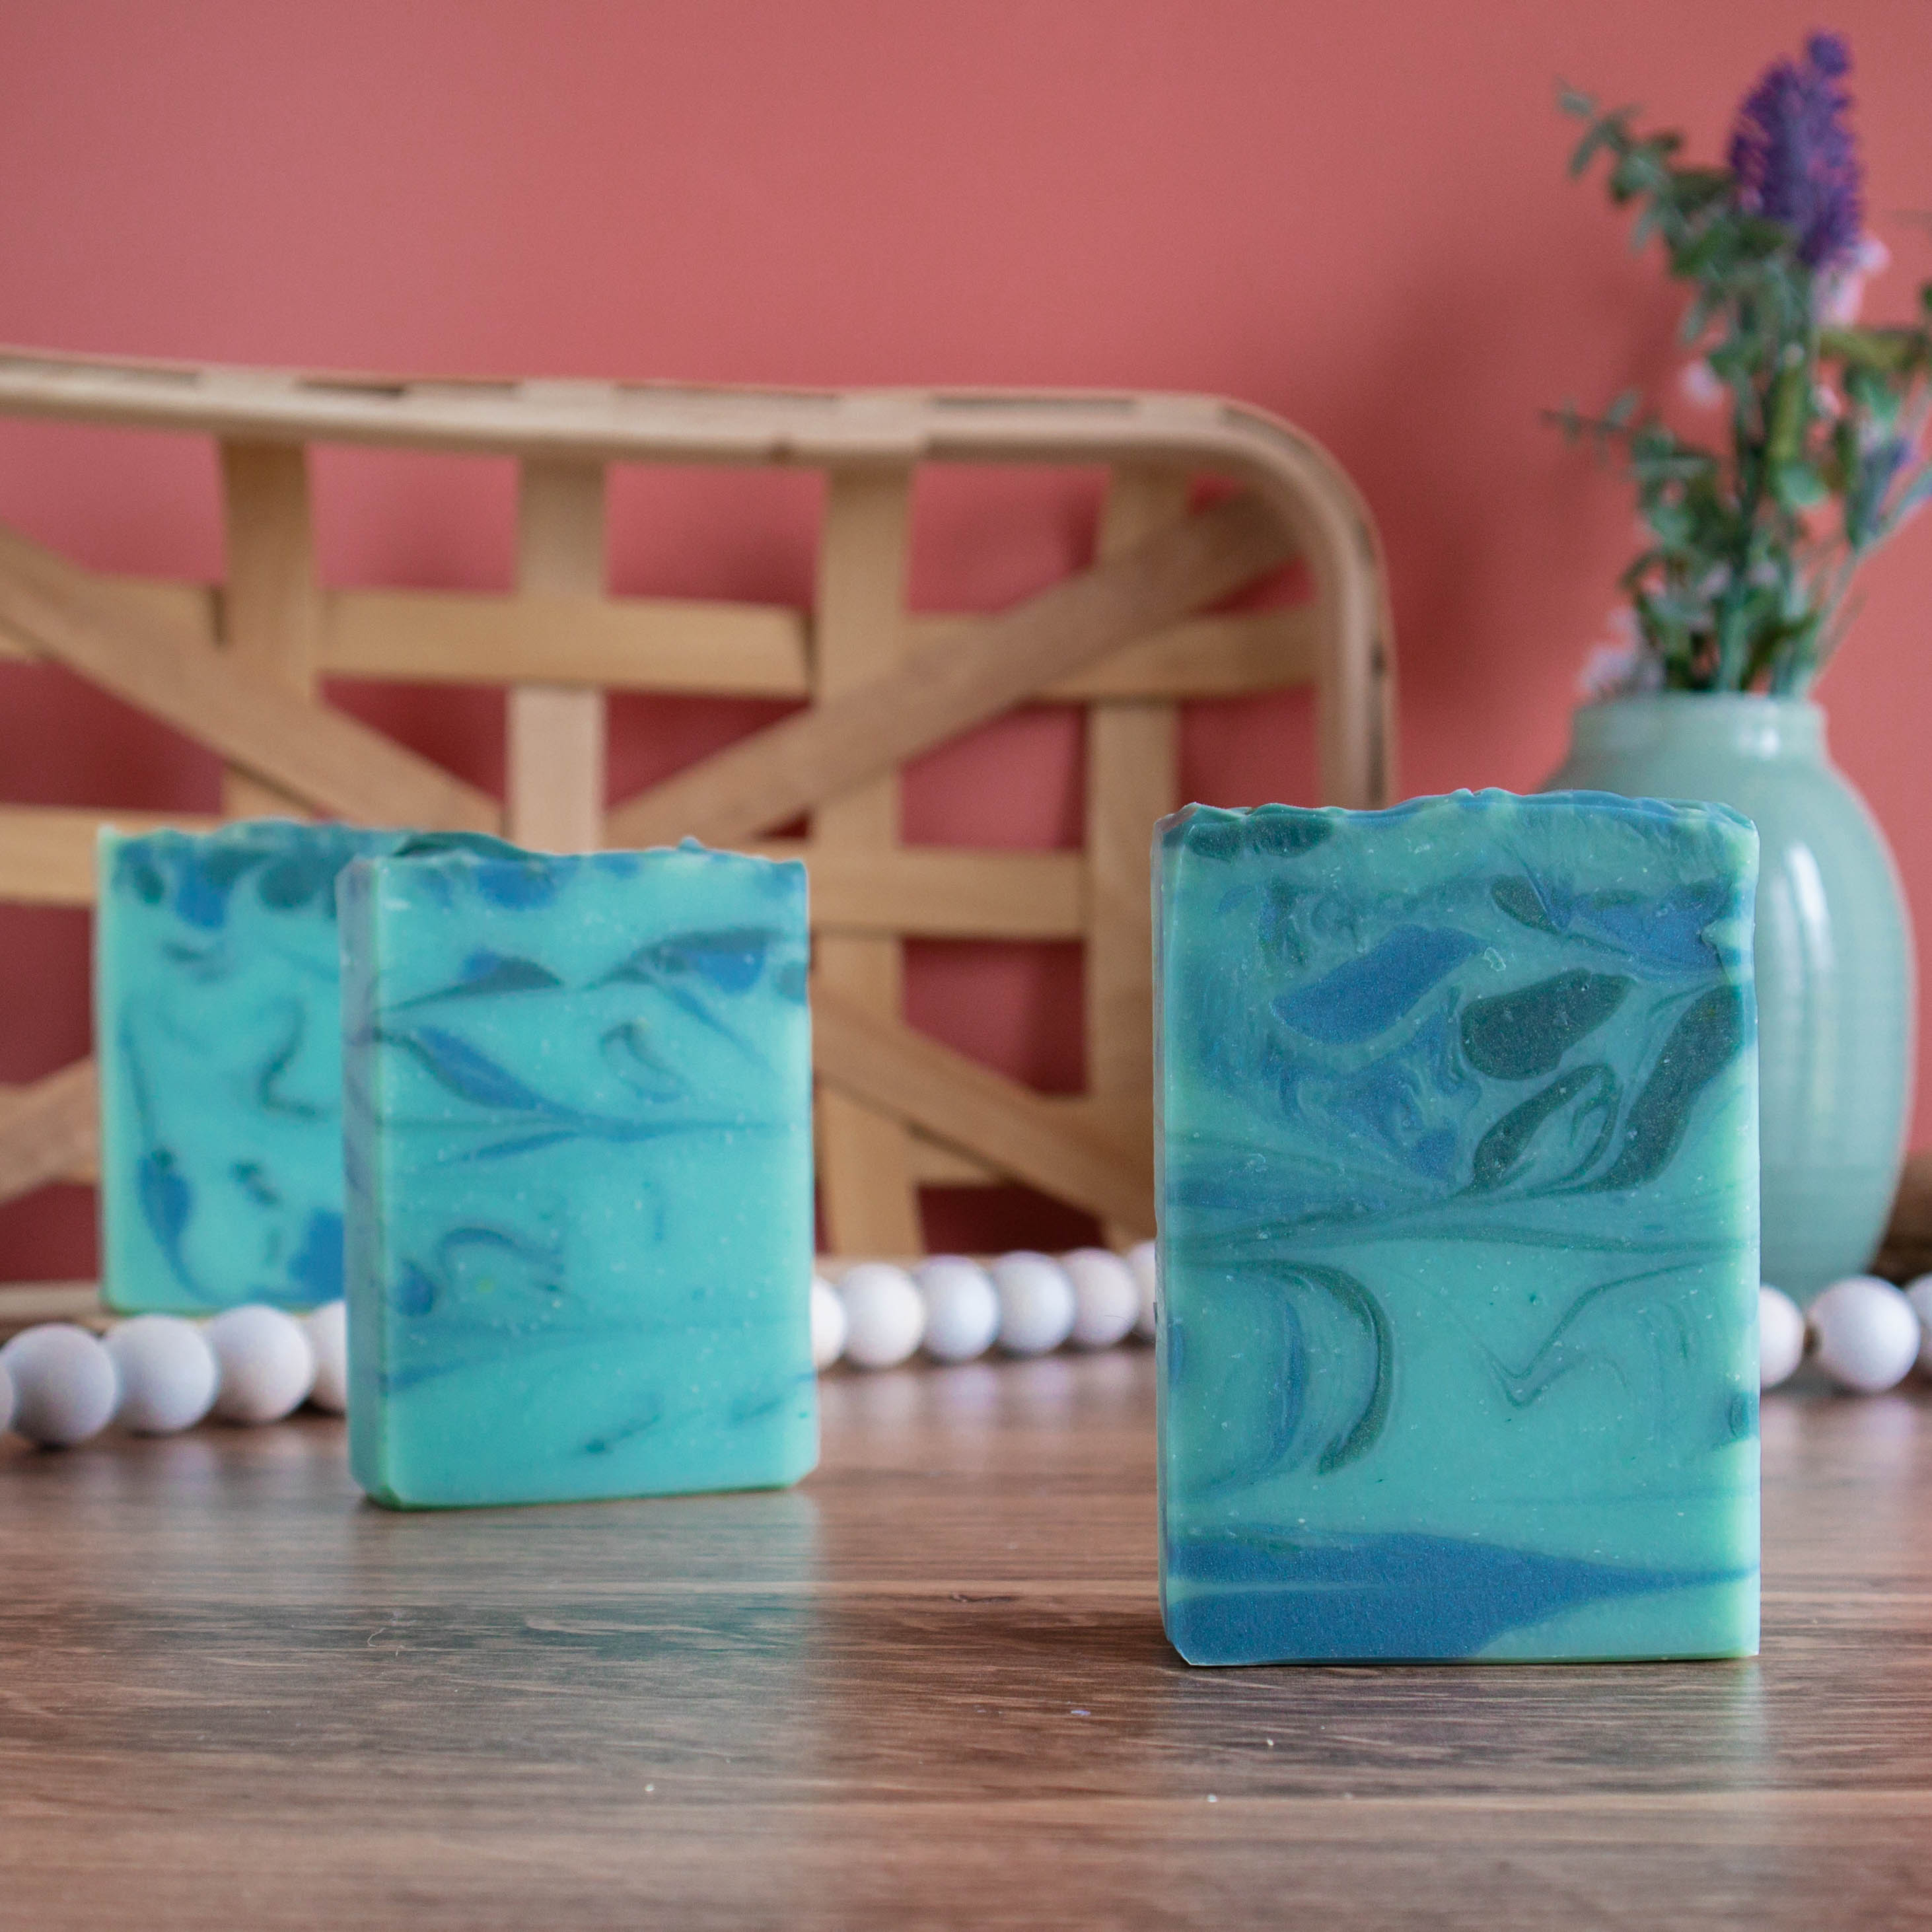 three bars of aspen soap are lined up diagonally left to right. they are sitting on a wooden board and there is a coral color background. in the back left is a woven wooden basket and in the back right is a green vase with some florals. there is a white bead rope running along in between the soaps.